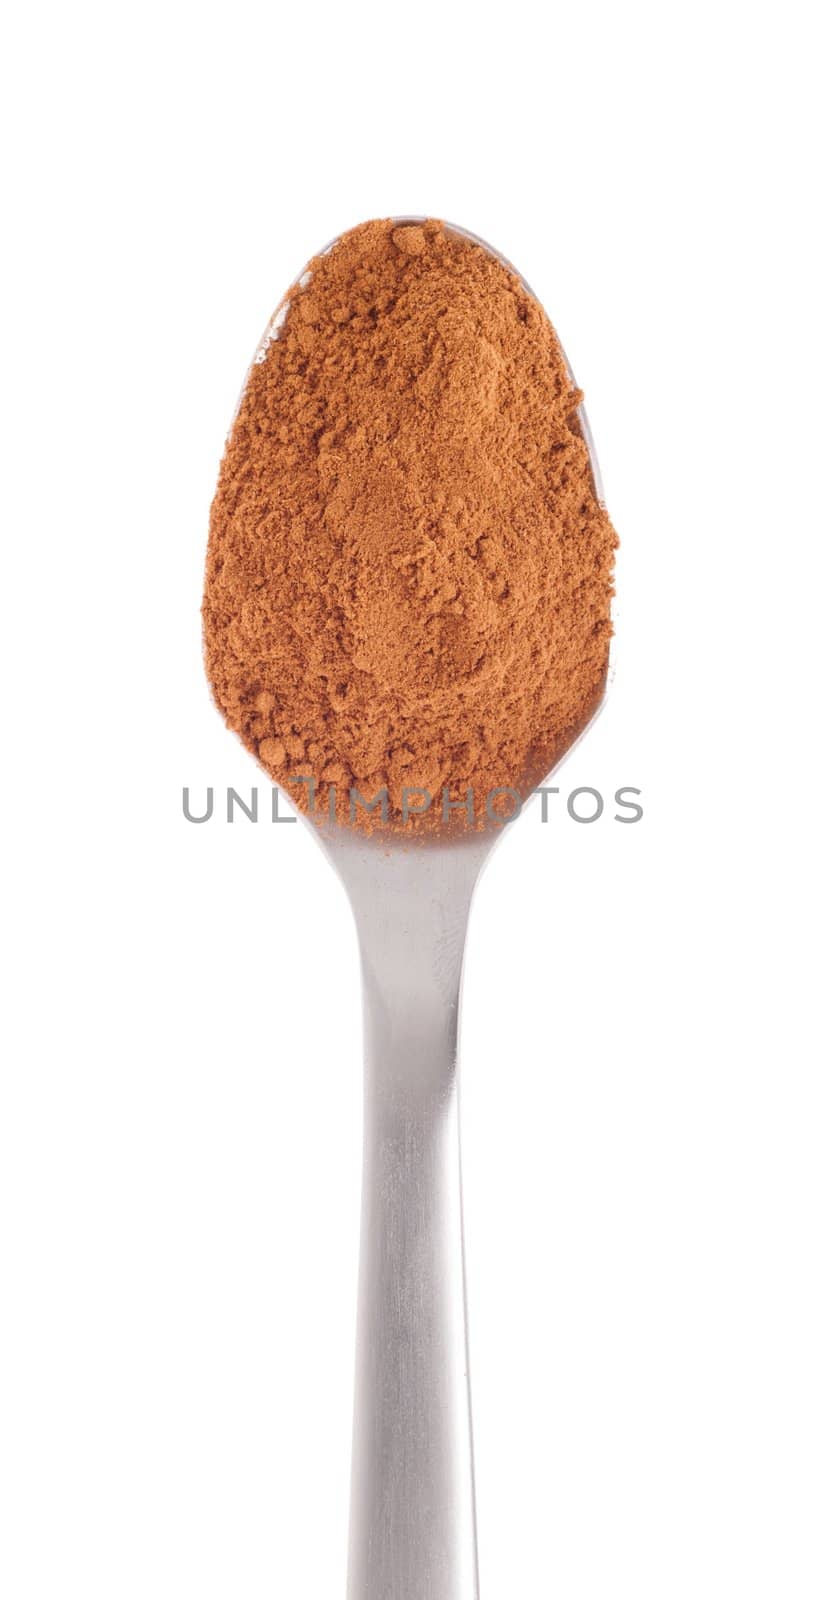 cinnamon spice on a stainless steel spoon, isolated on white background